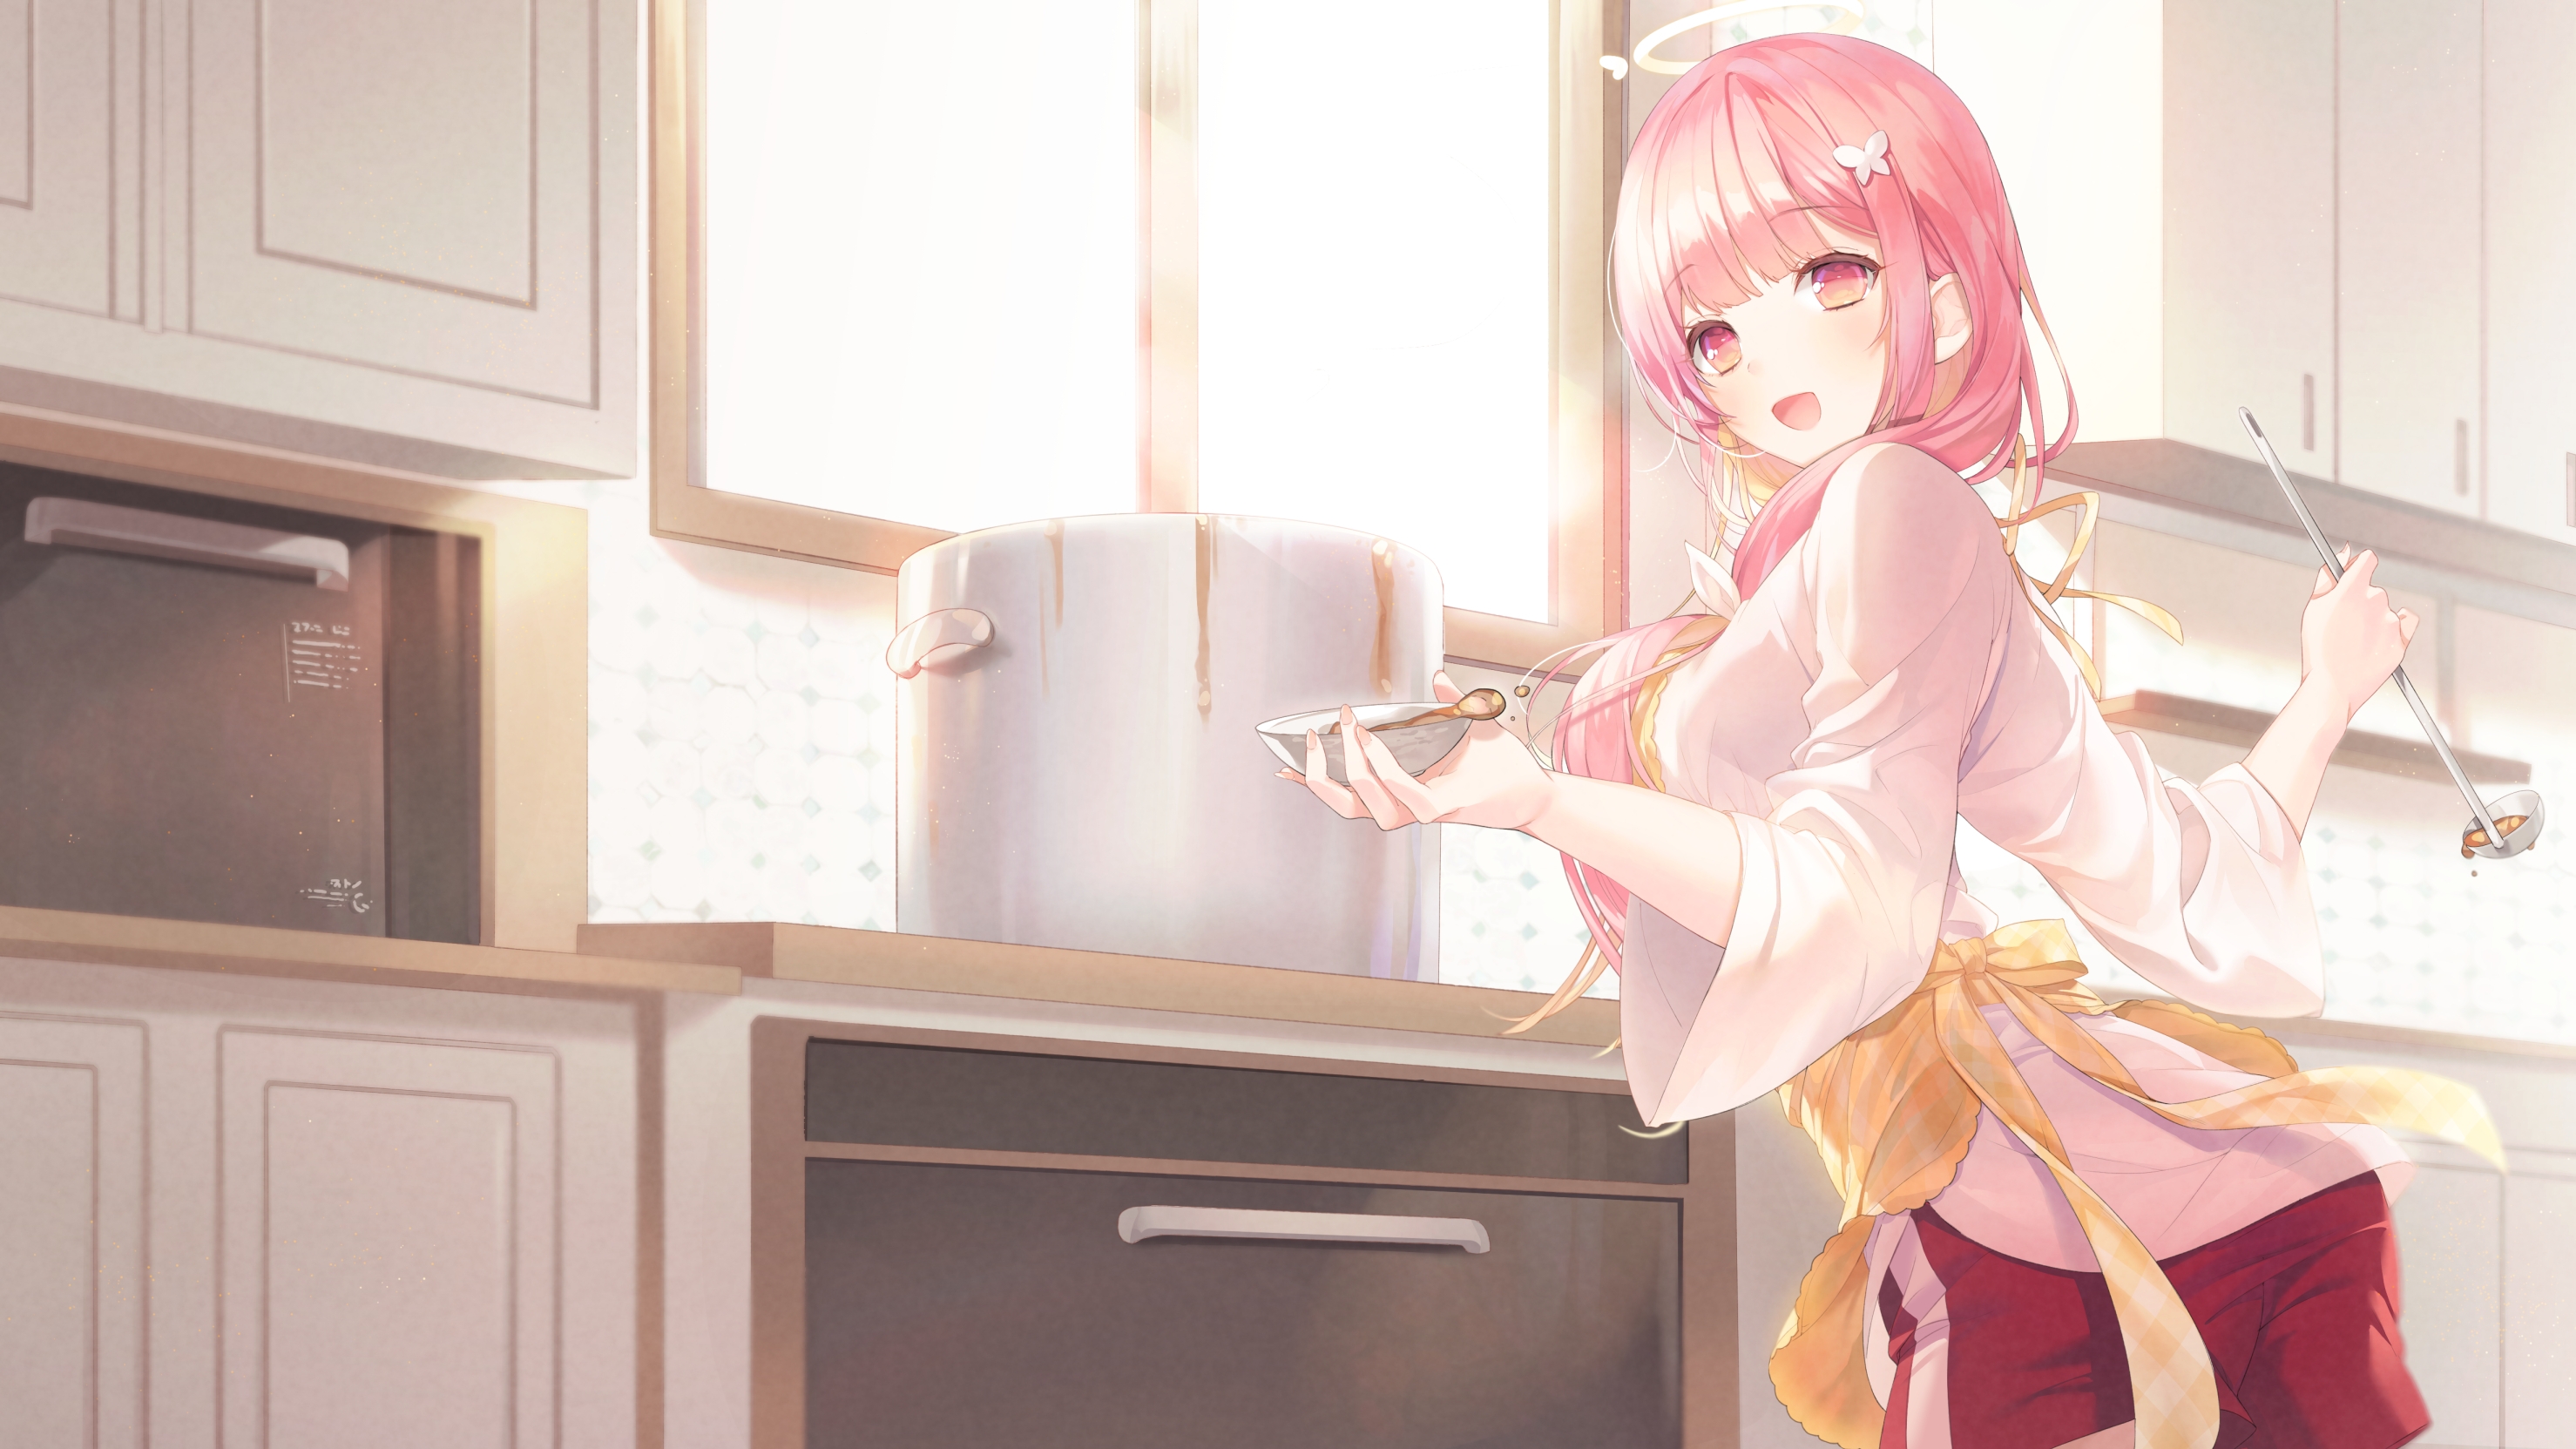 Anime Kitchen Wallpapers